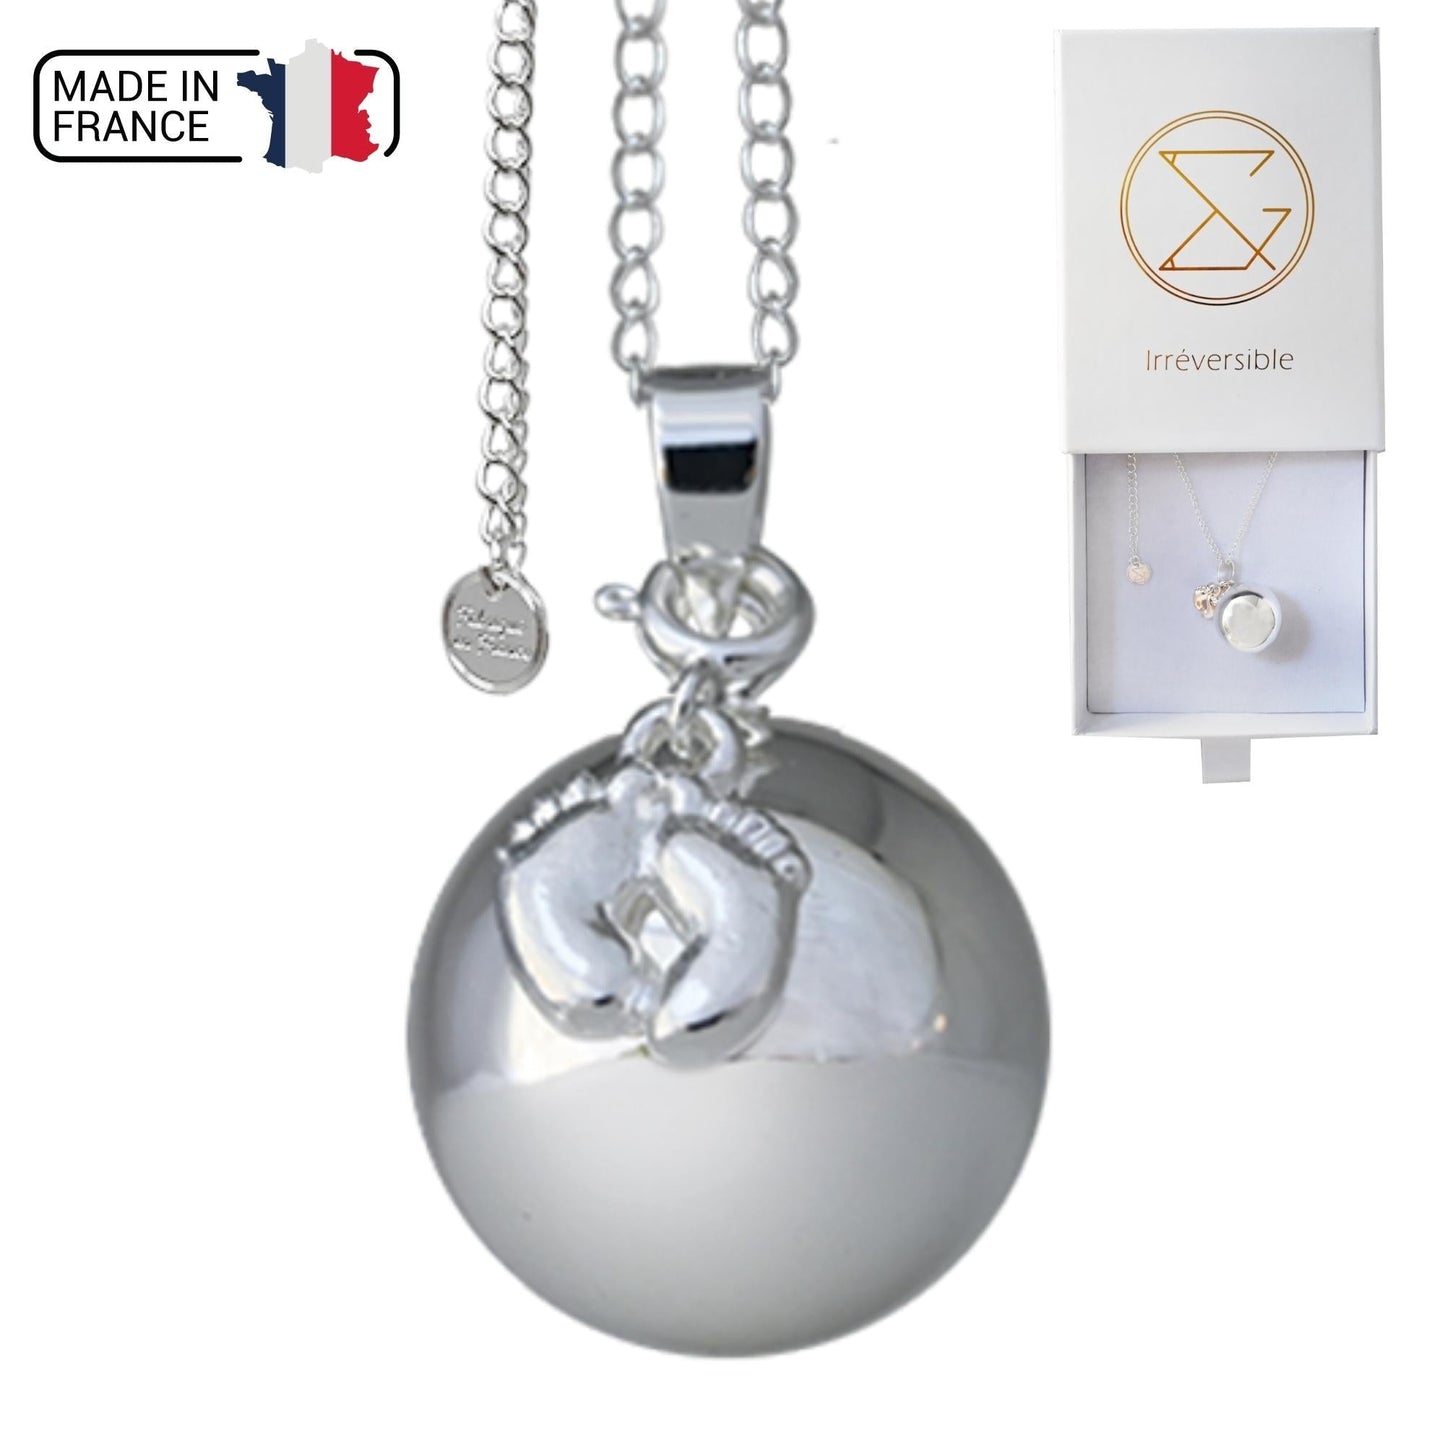 Bola de Grossesse - Made In France - Augustine Colliers Bola 100% Plaqué Argent, Bijou, Bijoux Maman, Bola, Grossesse